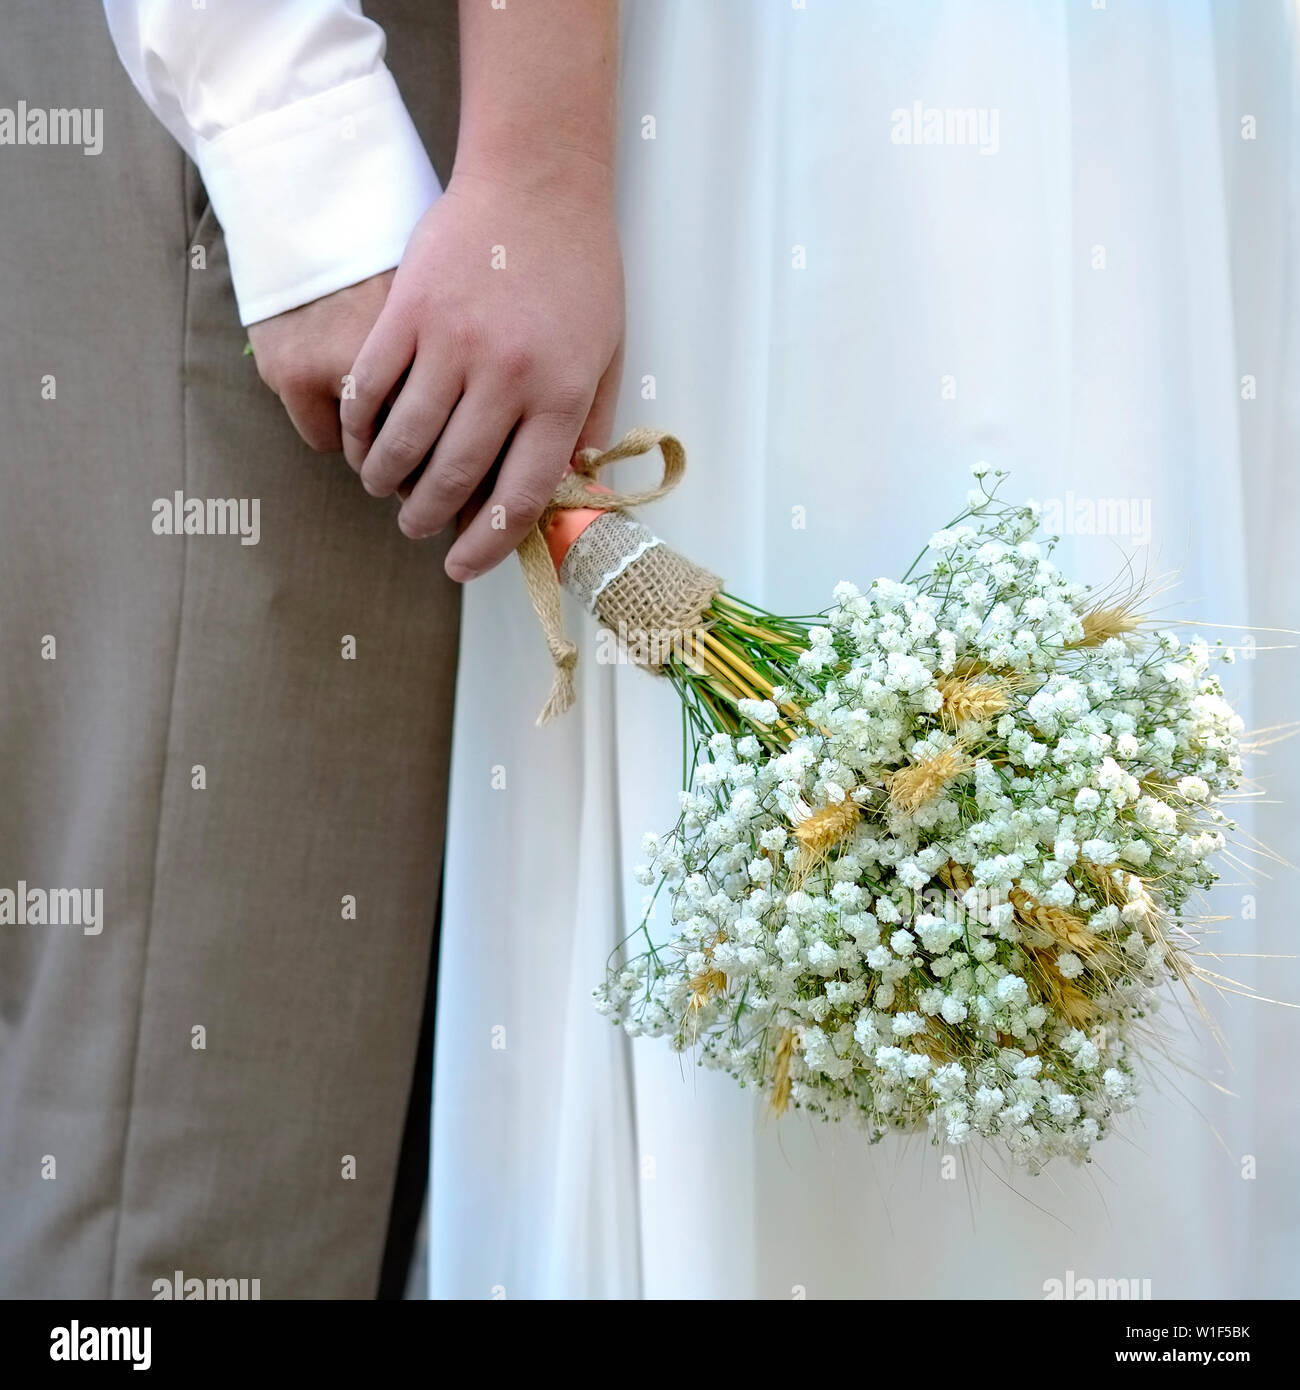 Bride and groom standing holding boquet marriage nuptials Stock Photo